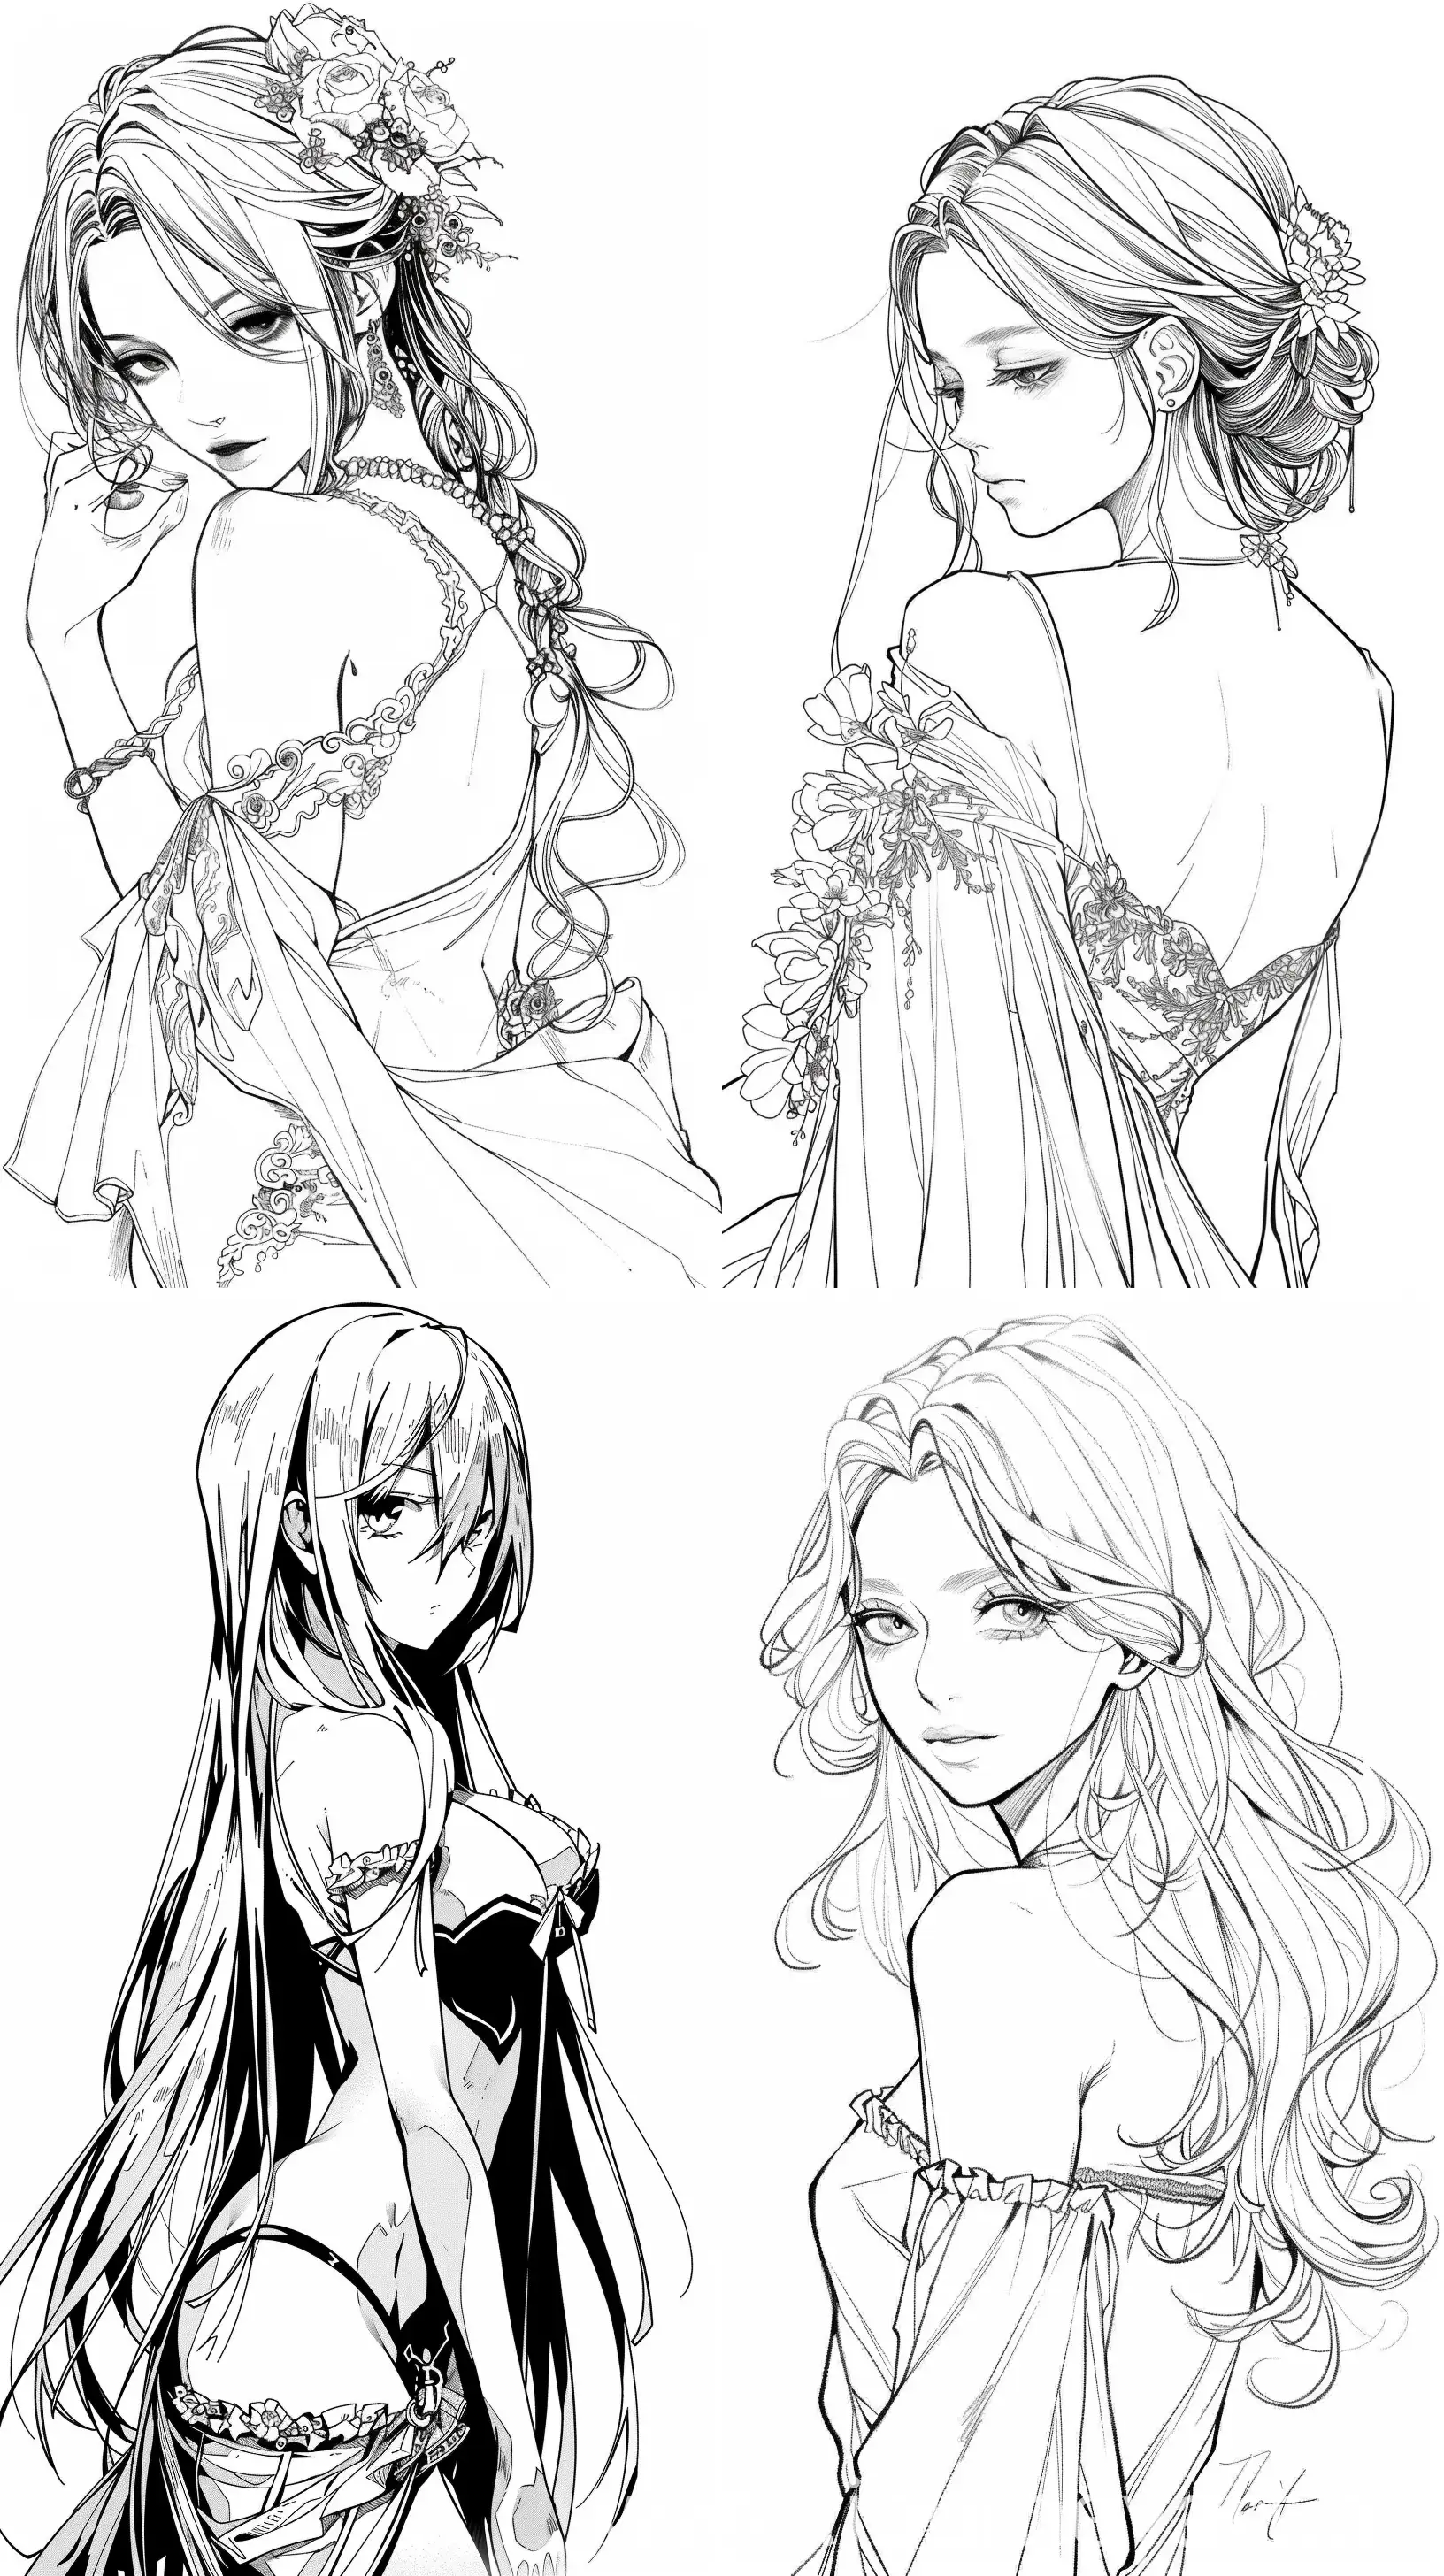 Elegant-Hotly-Female-Anime-Line-Drawing-in-Black-and-White